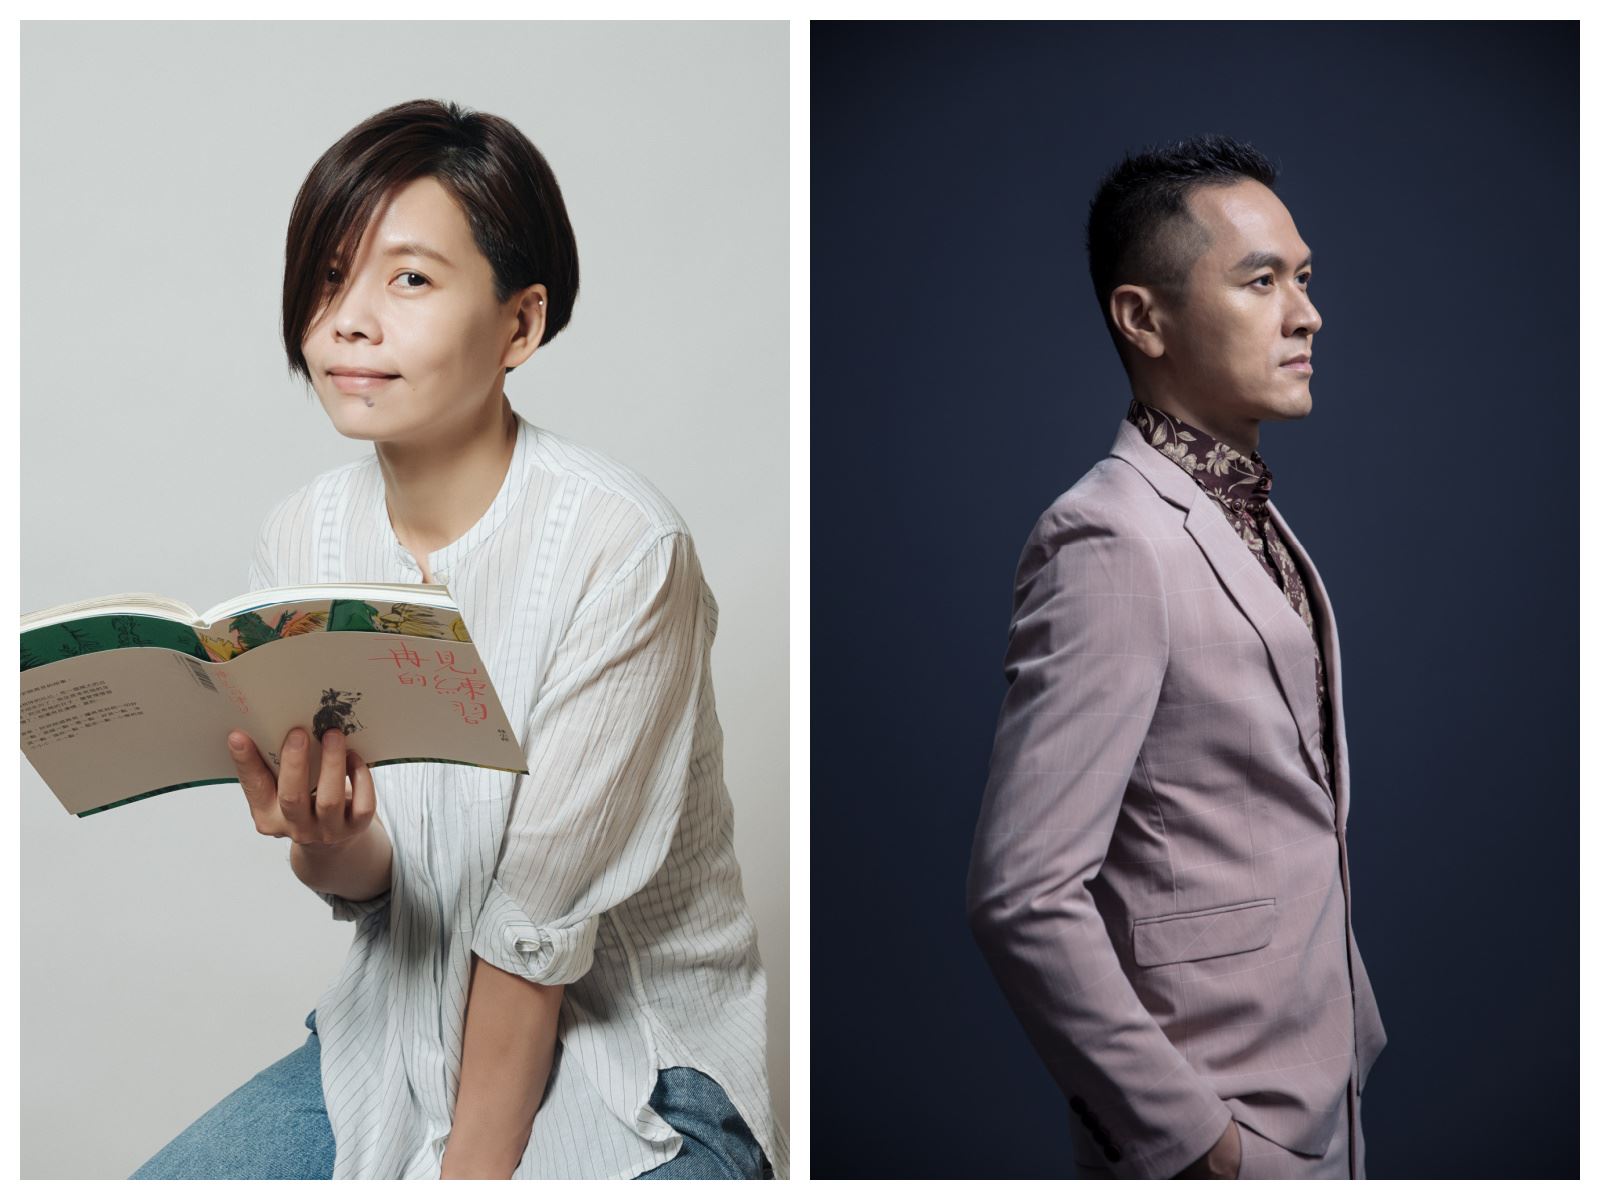 Taiwanese Illustrator Bei Lynn and Author Kevin Chen to be Featured at Toronto International Festival of Authors